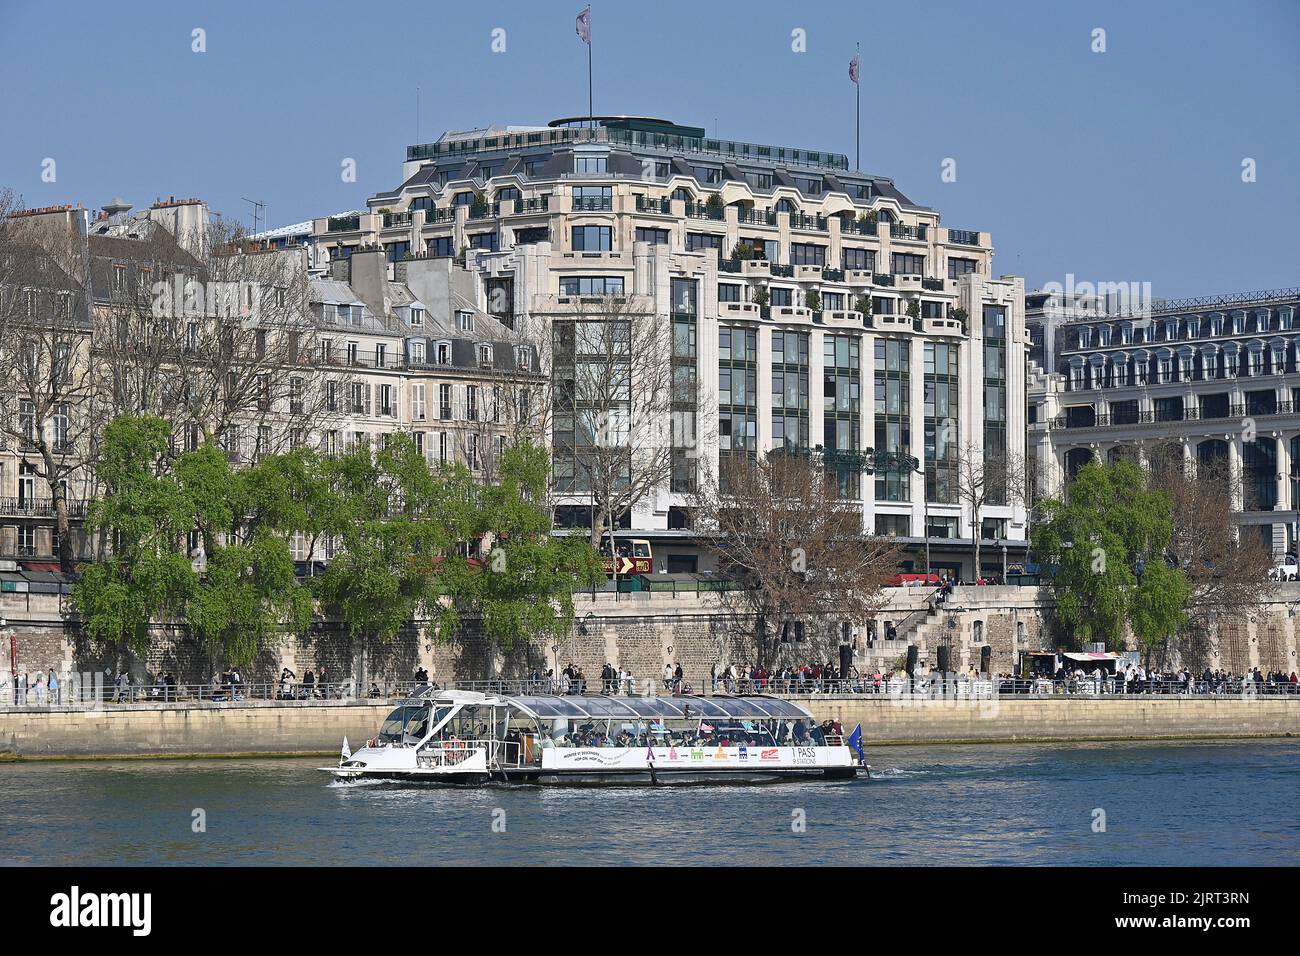 Paris (France): renovated building of La Samaritaine department store in the 1st arrondissement (district) by the River Seine, a masterpiece of Art No Stock Photo